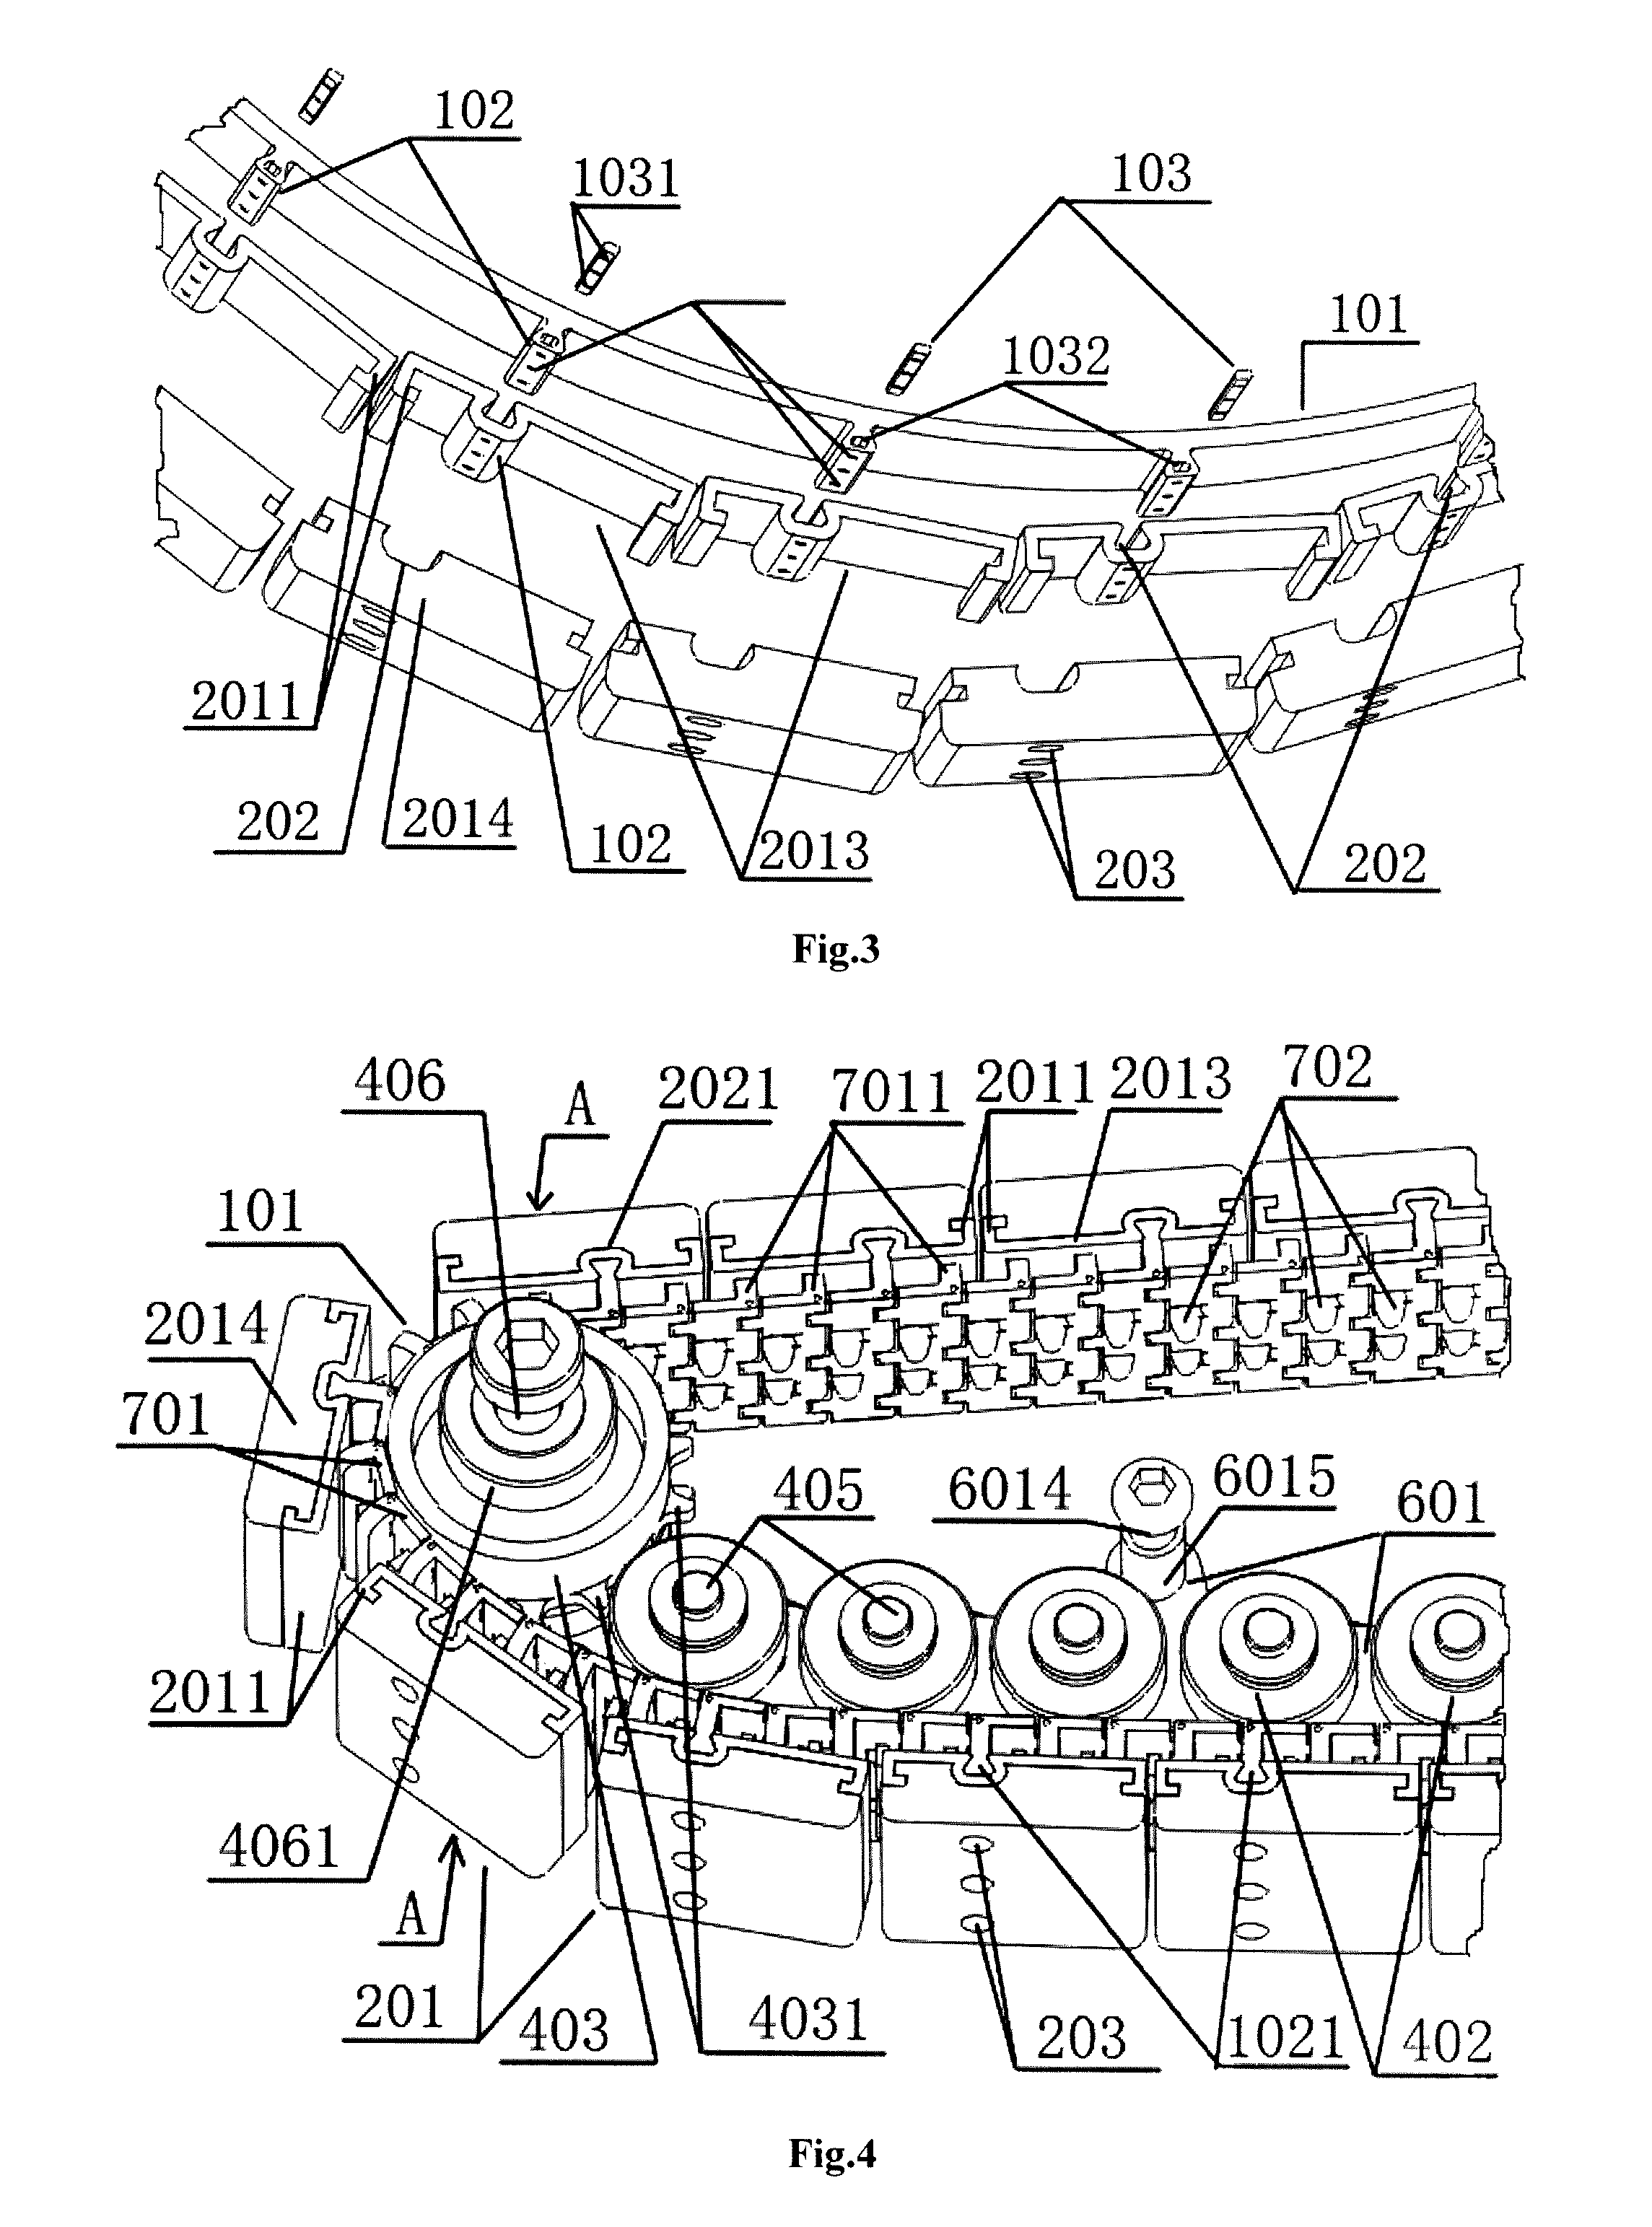 Track wheel with division of work between track and chain, methods for fitting pitch rails to flexible chain and for buffering pre-stress, and open-close type wheel axle